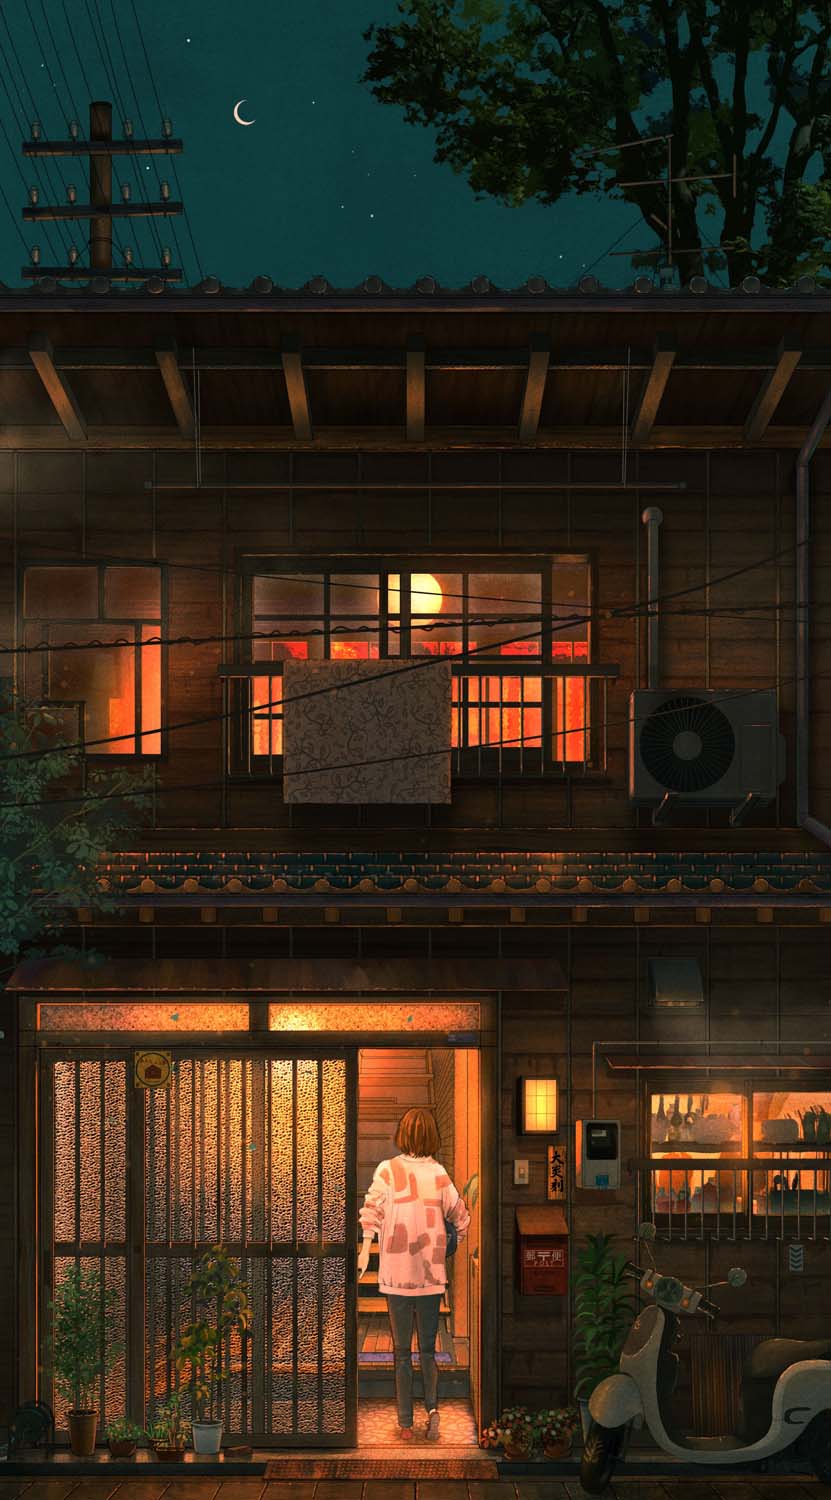 House In Japan IPhone Wallpaper HD - IPhone Wallpapers : iPhone Wallpapers